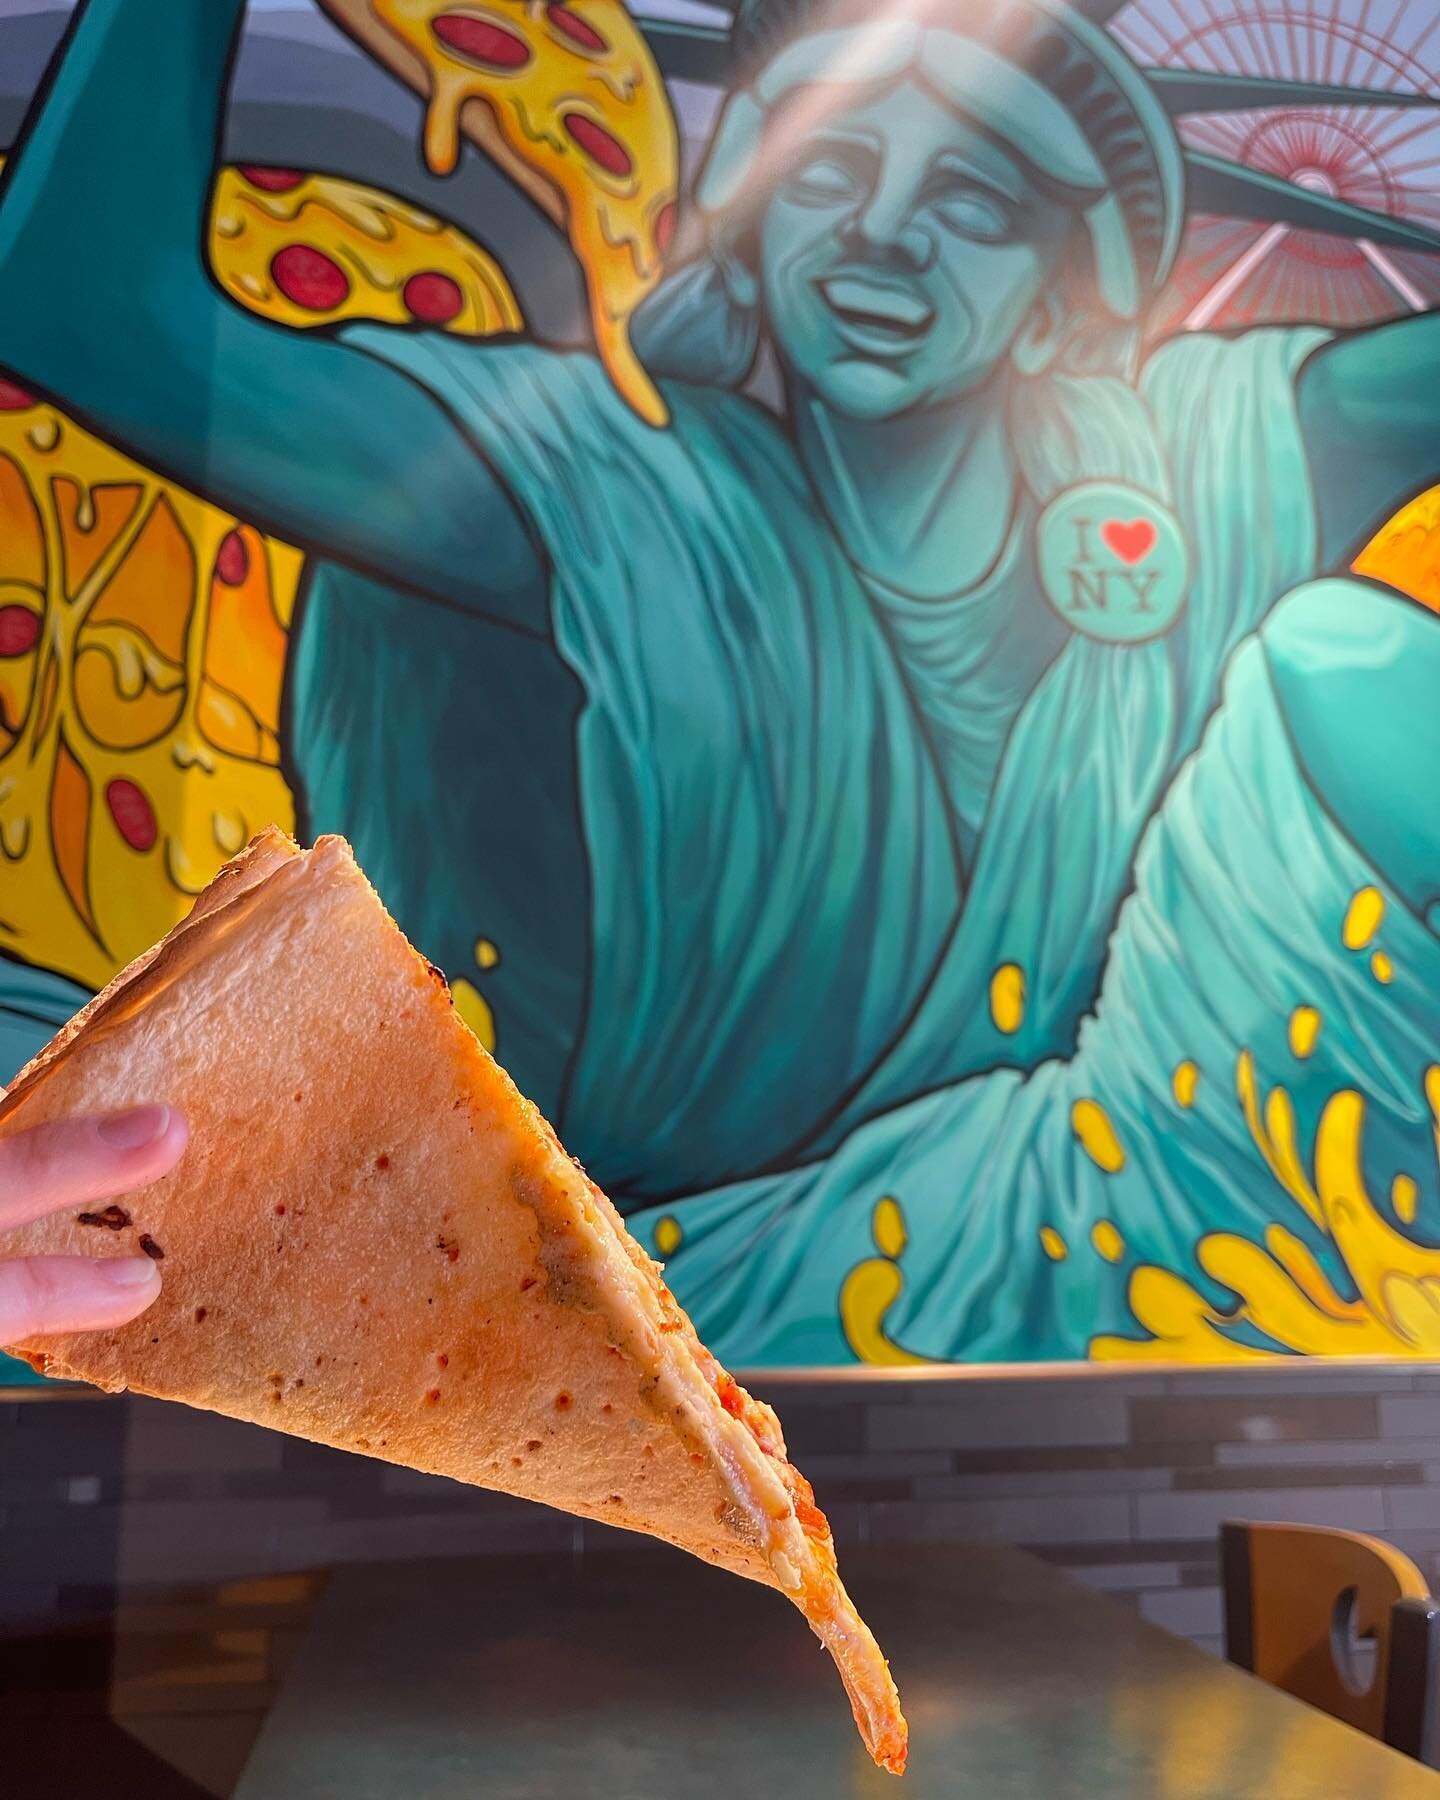 A fold fit for Lady Liberty&hellip;🗽 and you of course! Come see us on the back end of this week to see if the &lsquo;New York Fold&rsquo; is your new favorite way to eat pizza! 🍕 

#417eats #branson #bransonmo #bransoneats #visitbranson #explorebr